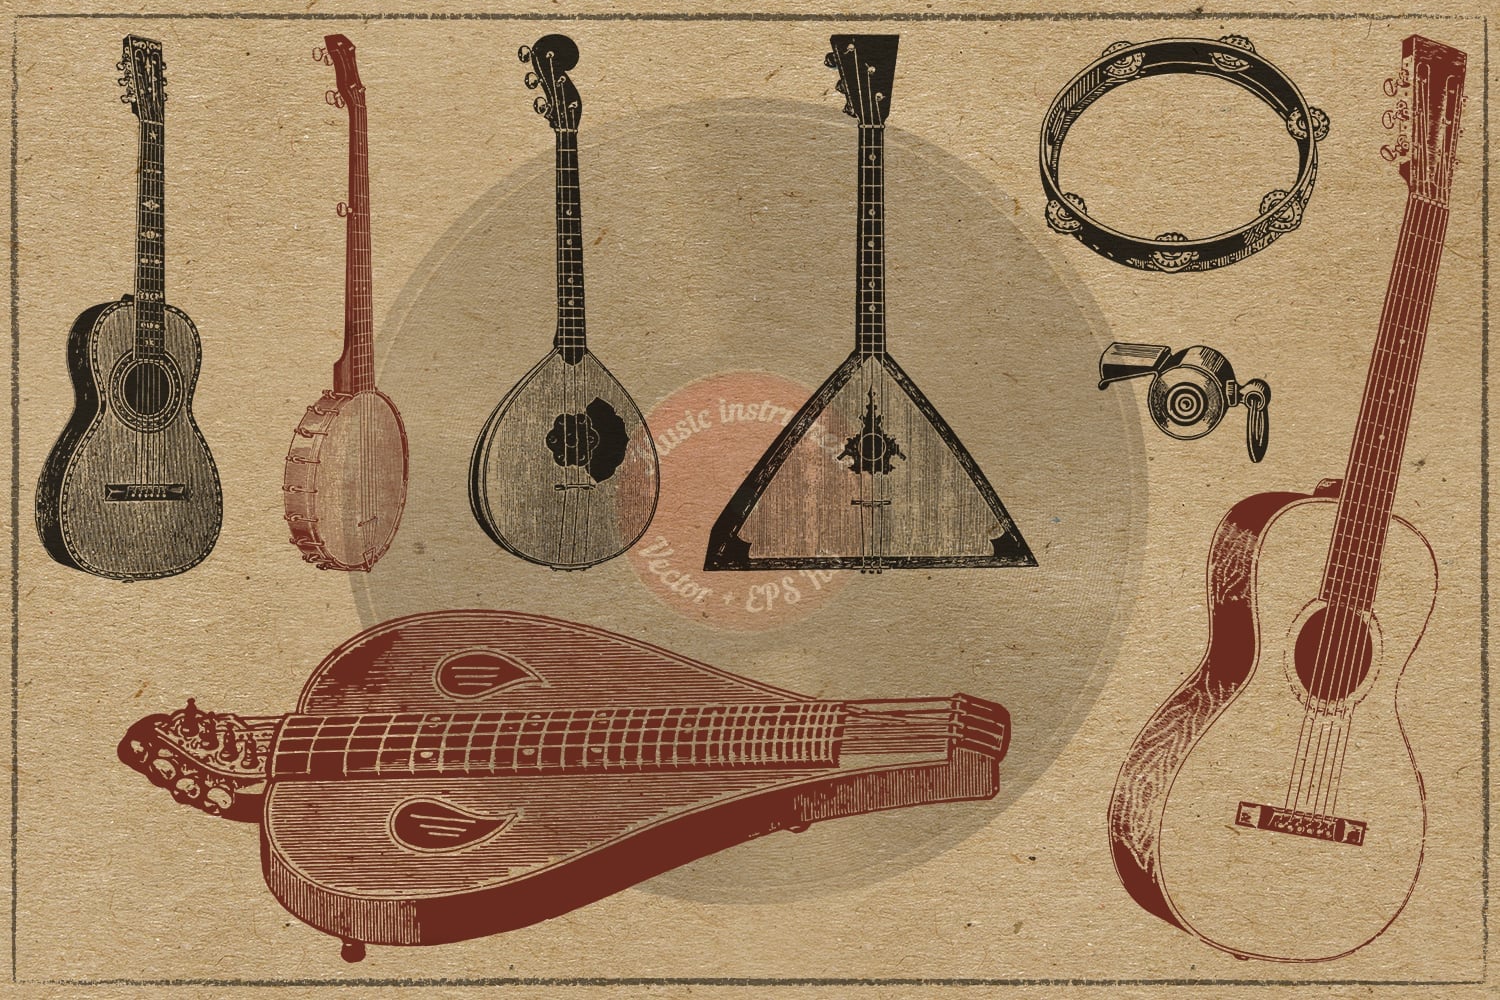 Guitar instruments - from old to modern.